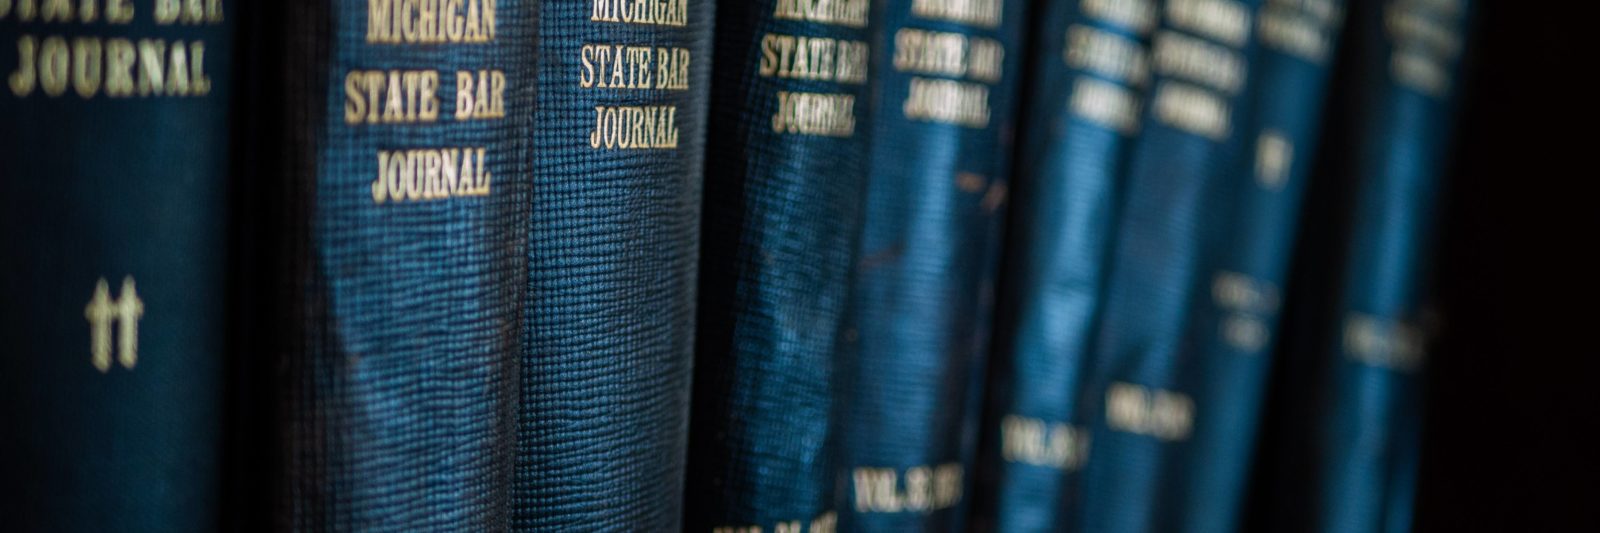 close-up of michigan state law journals